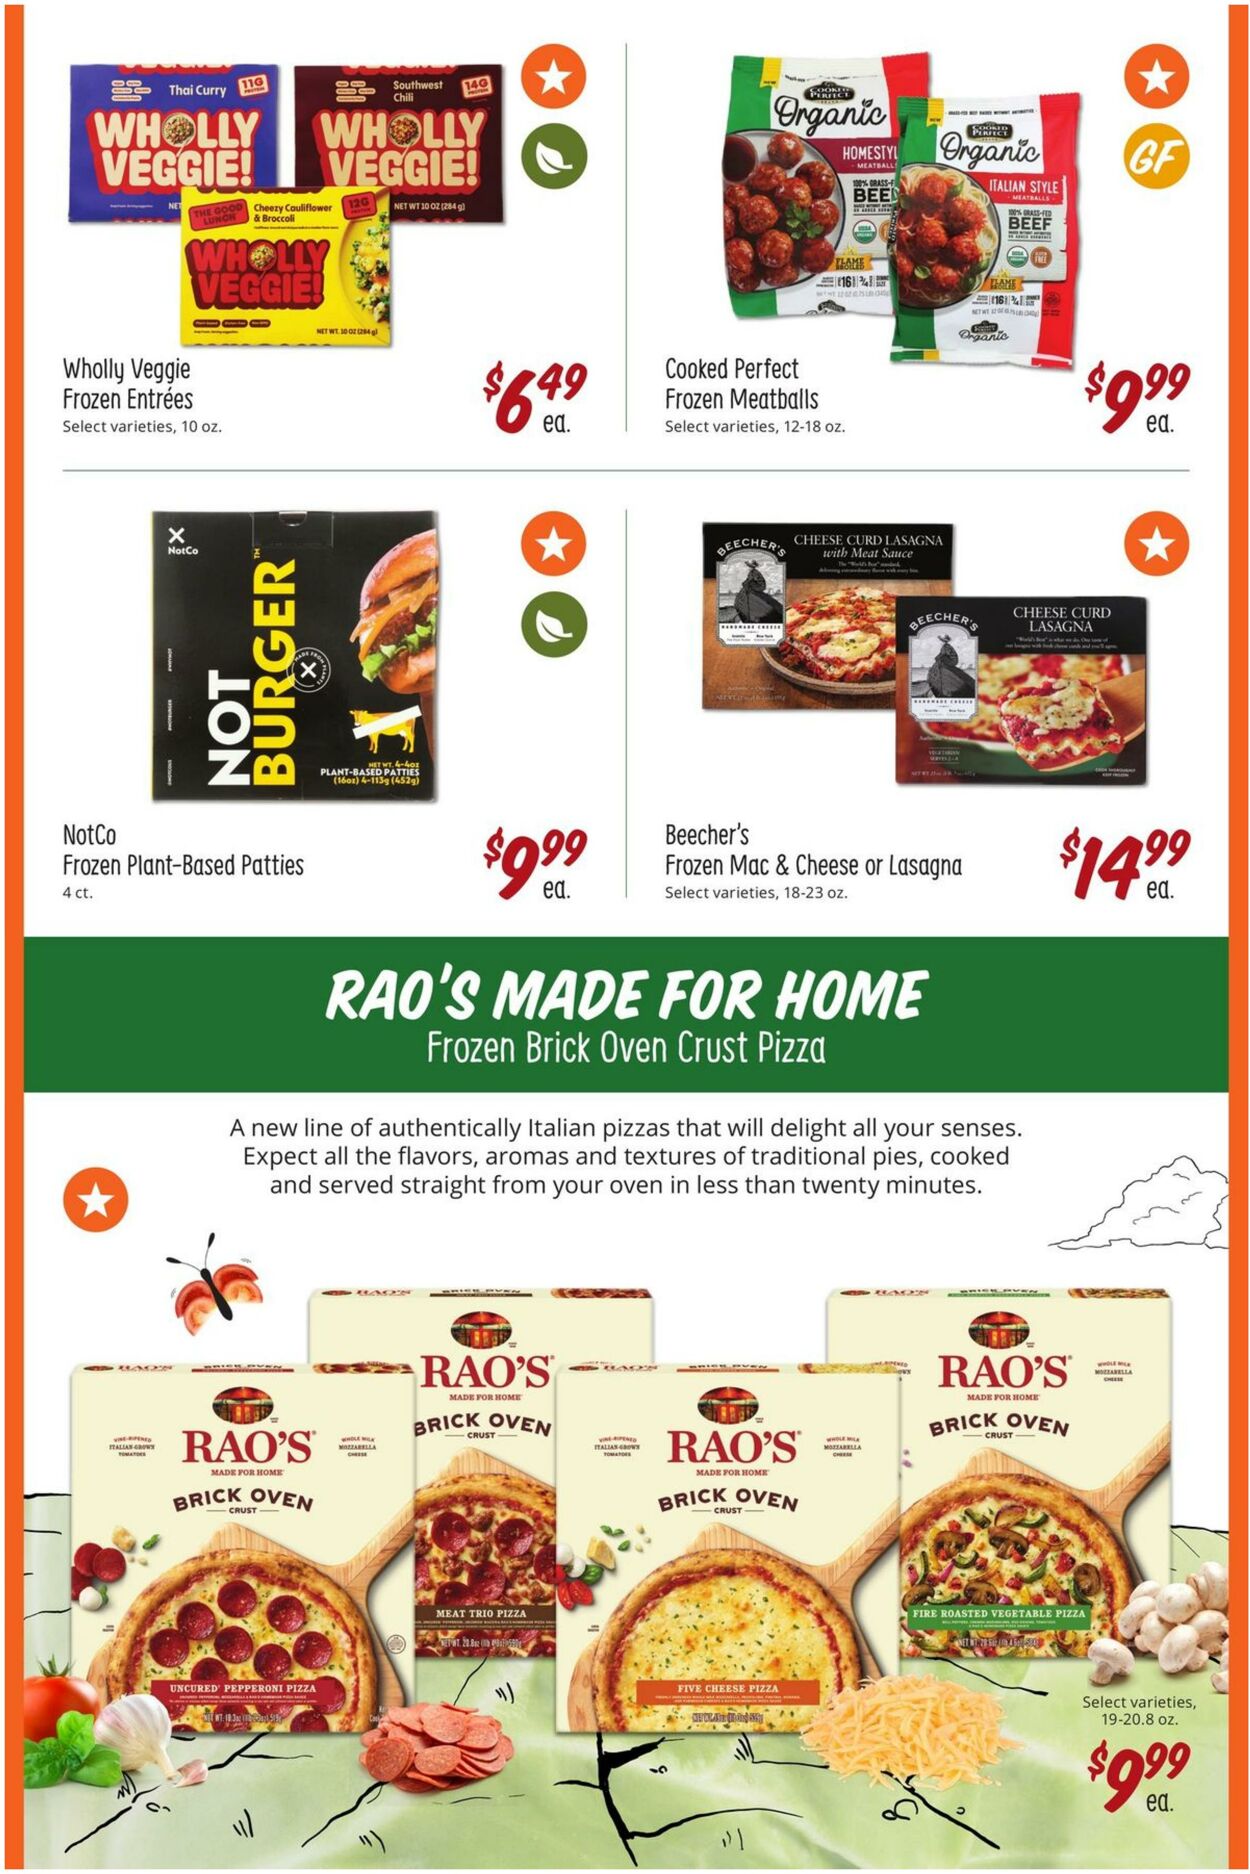 Weekly ad Sprouts 08/24/2022 - 09/27/2022